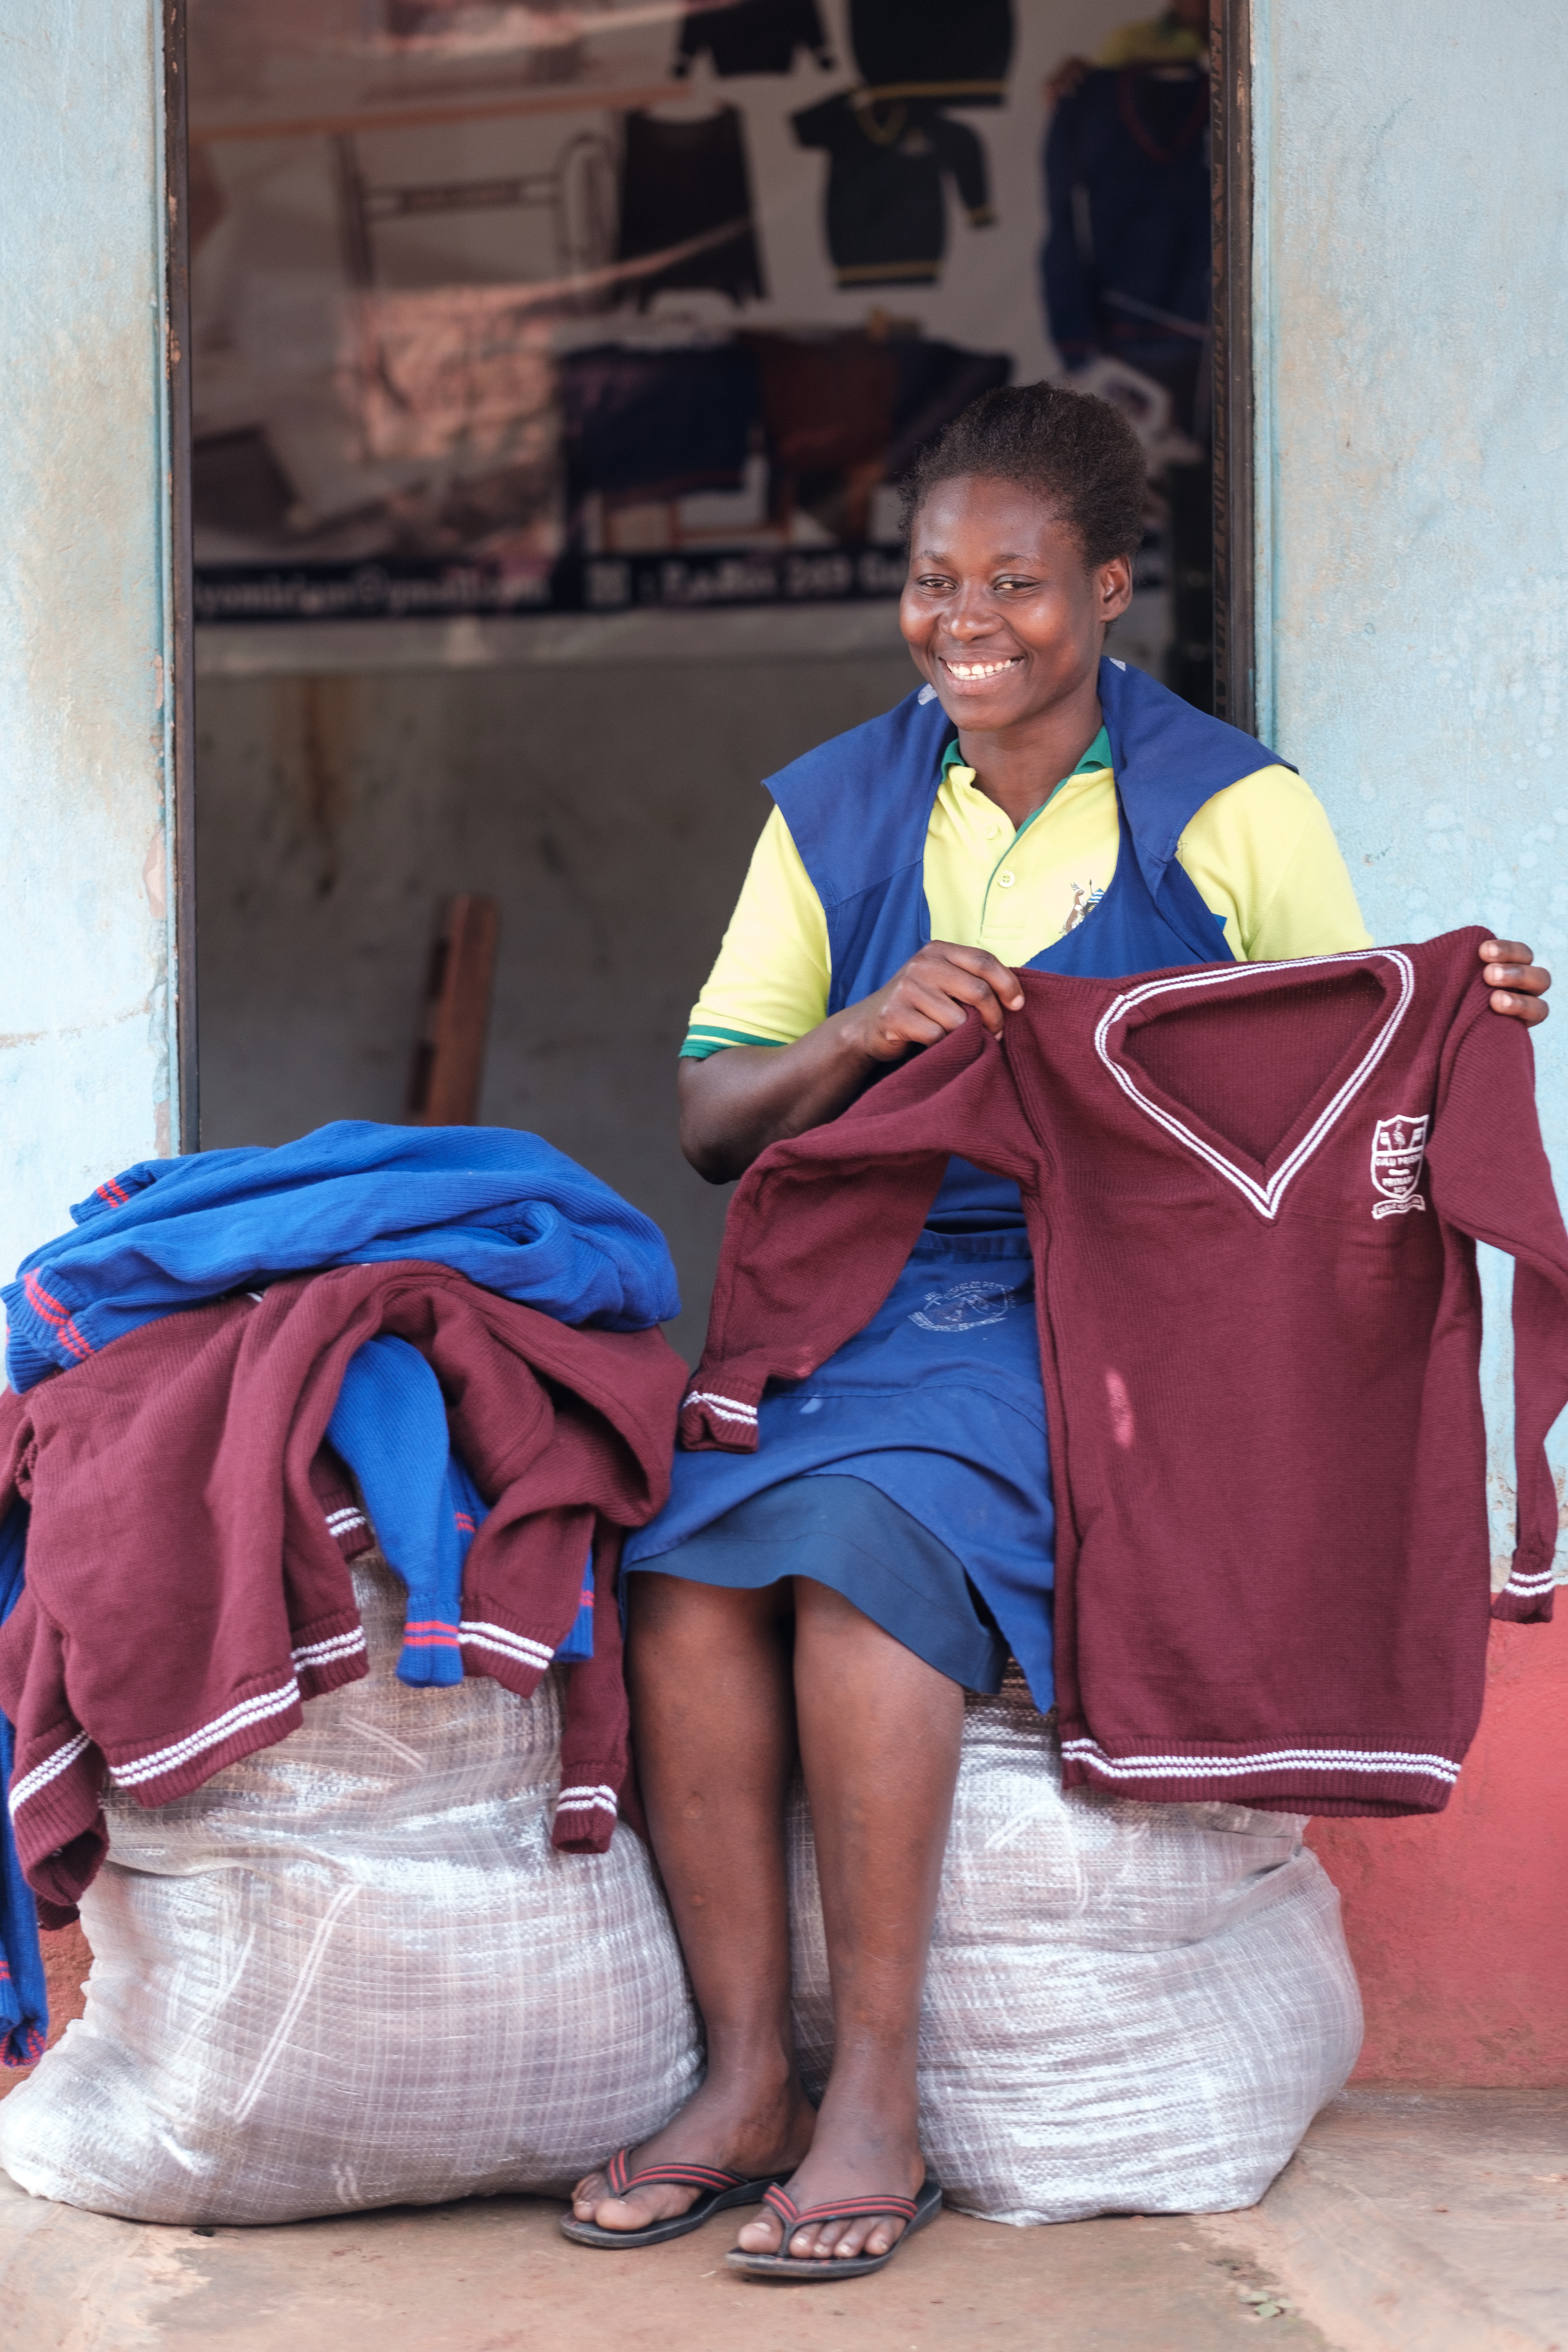 Miriam and some of the school sweaters she made. She is waiting for schools to reopen so that she can deliver them and receive her payment.